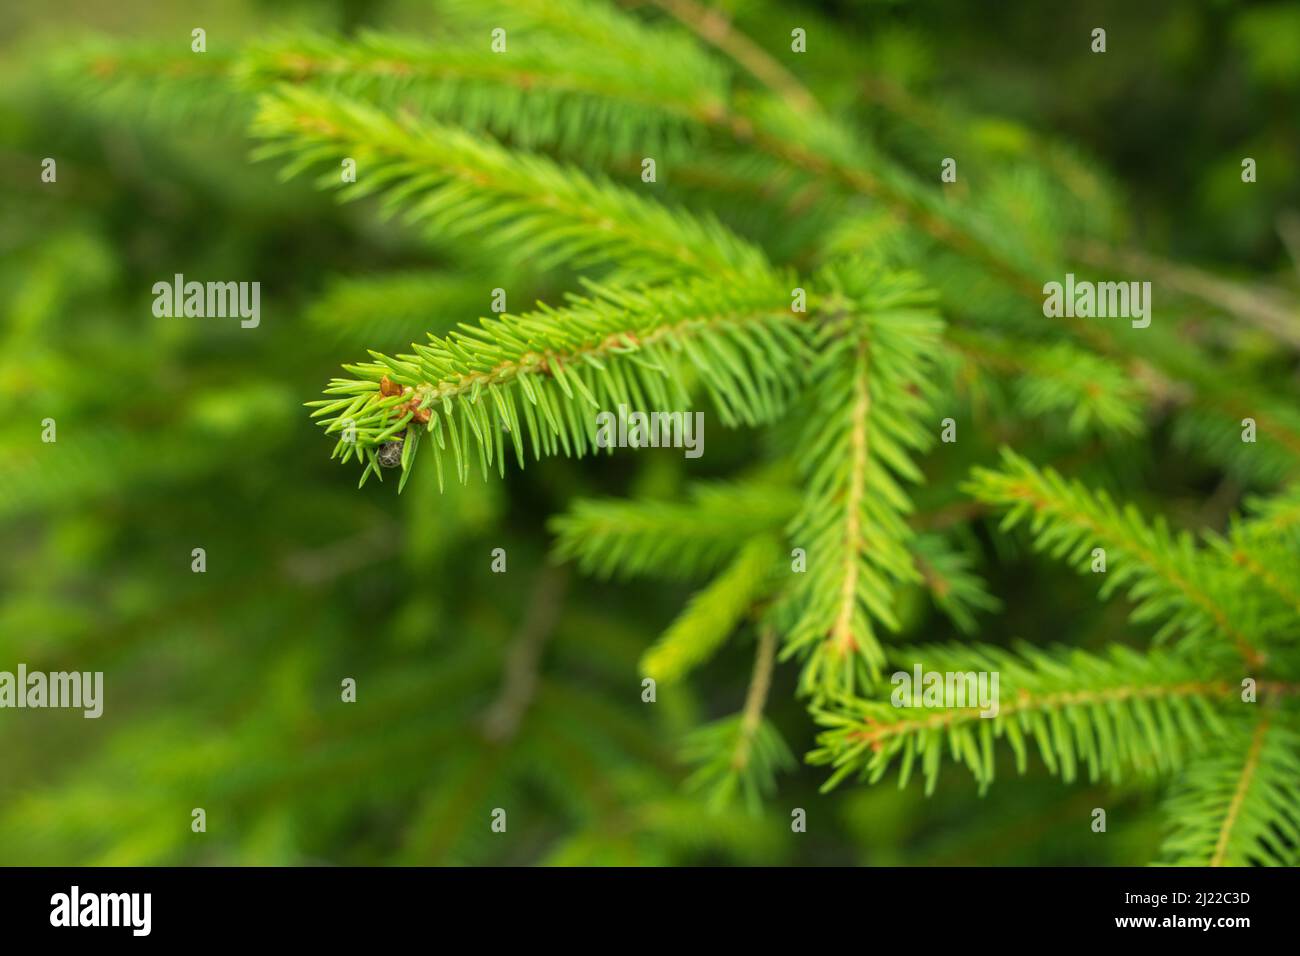 Norway spruce, or European spruce. coniferous tree, type species of the genus Spruce of the Pine family. Stock Photo